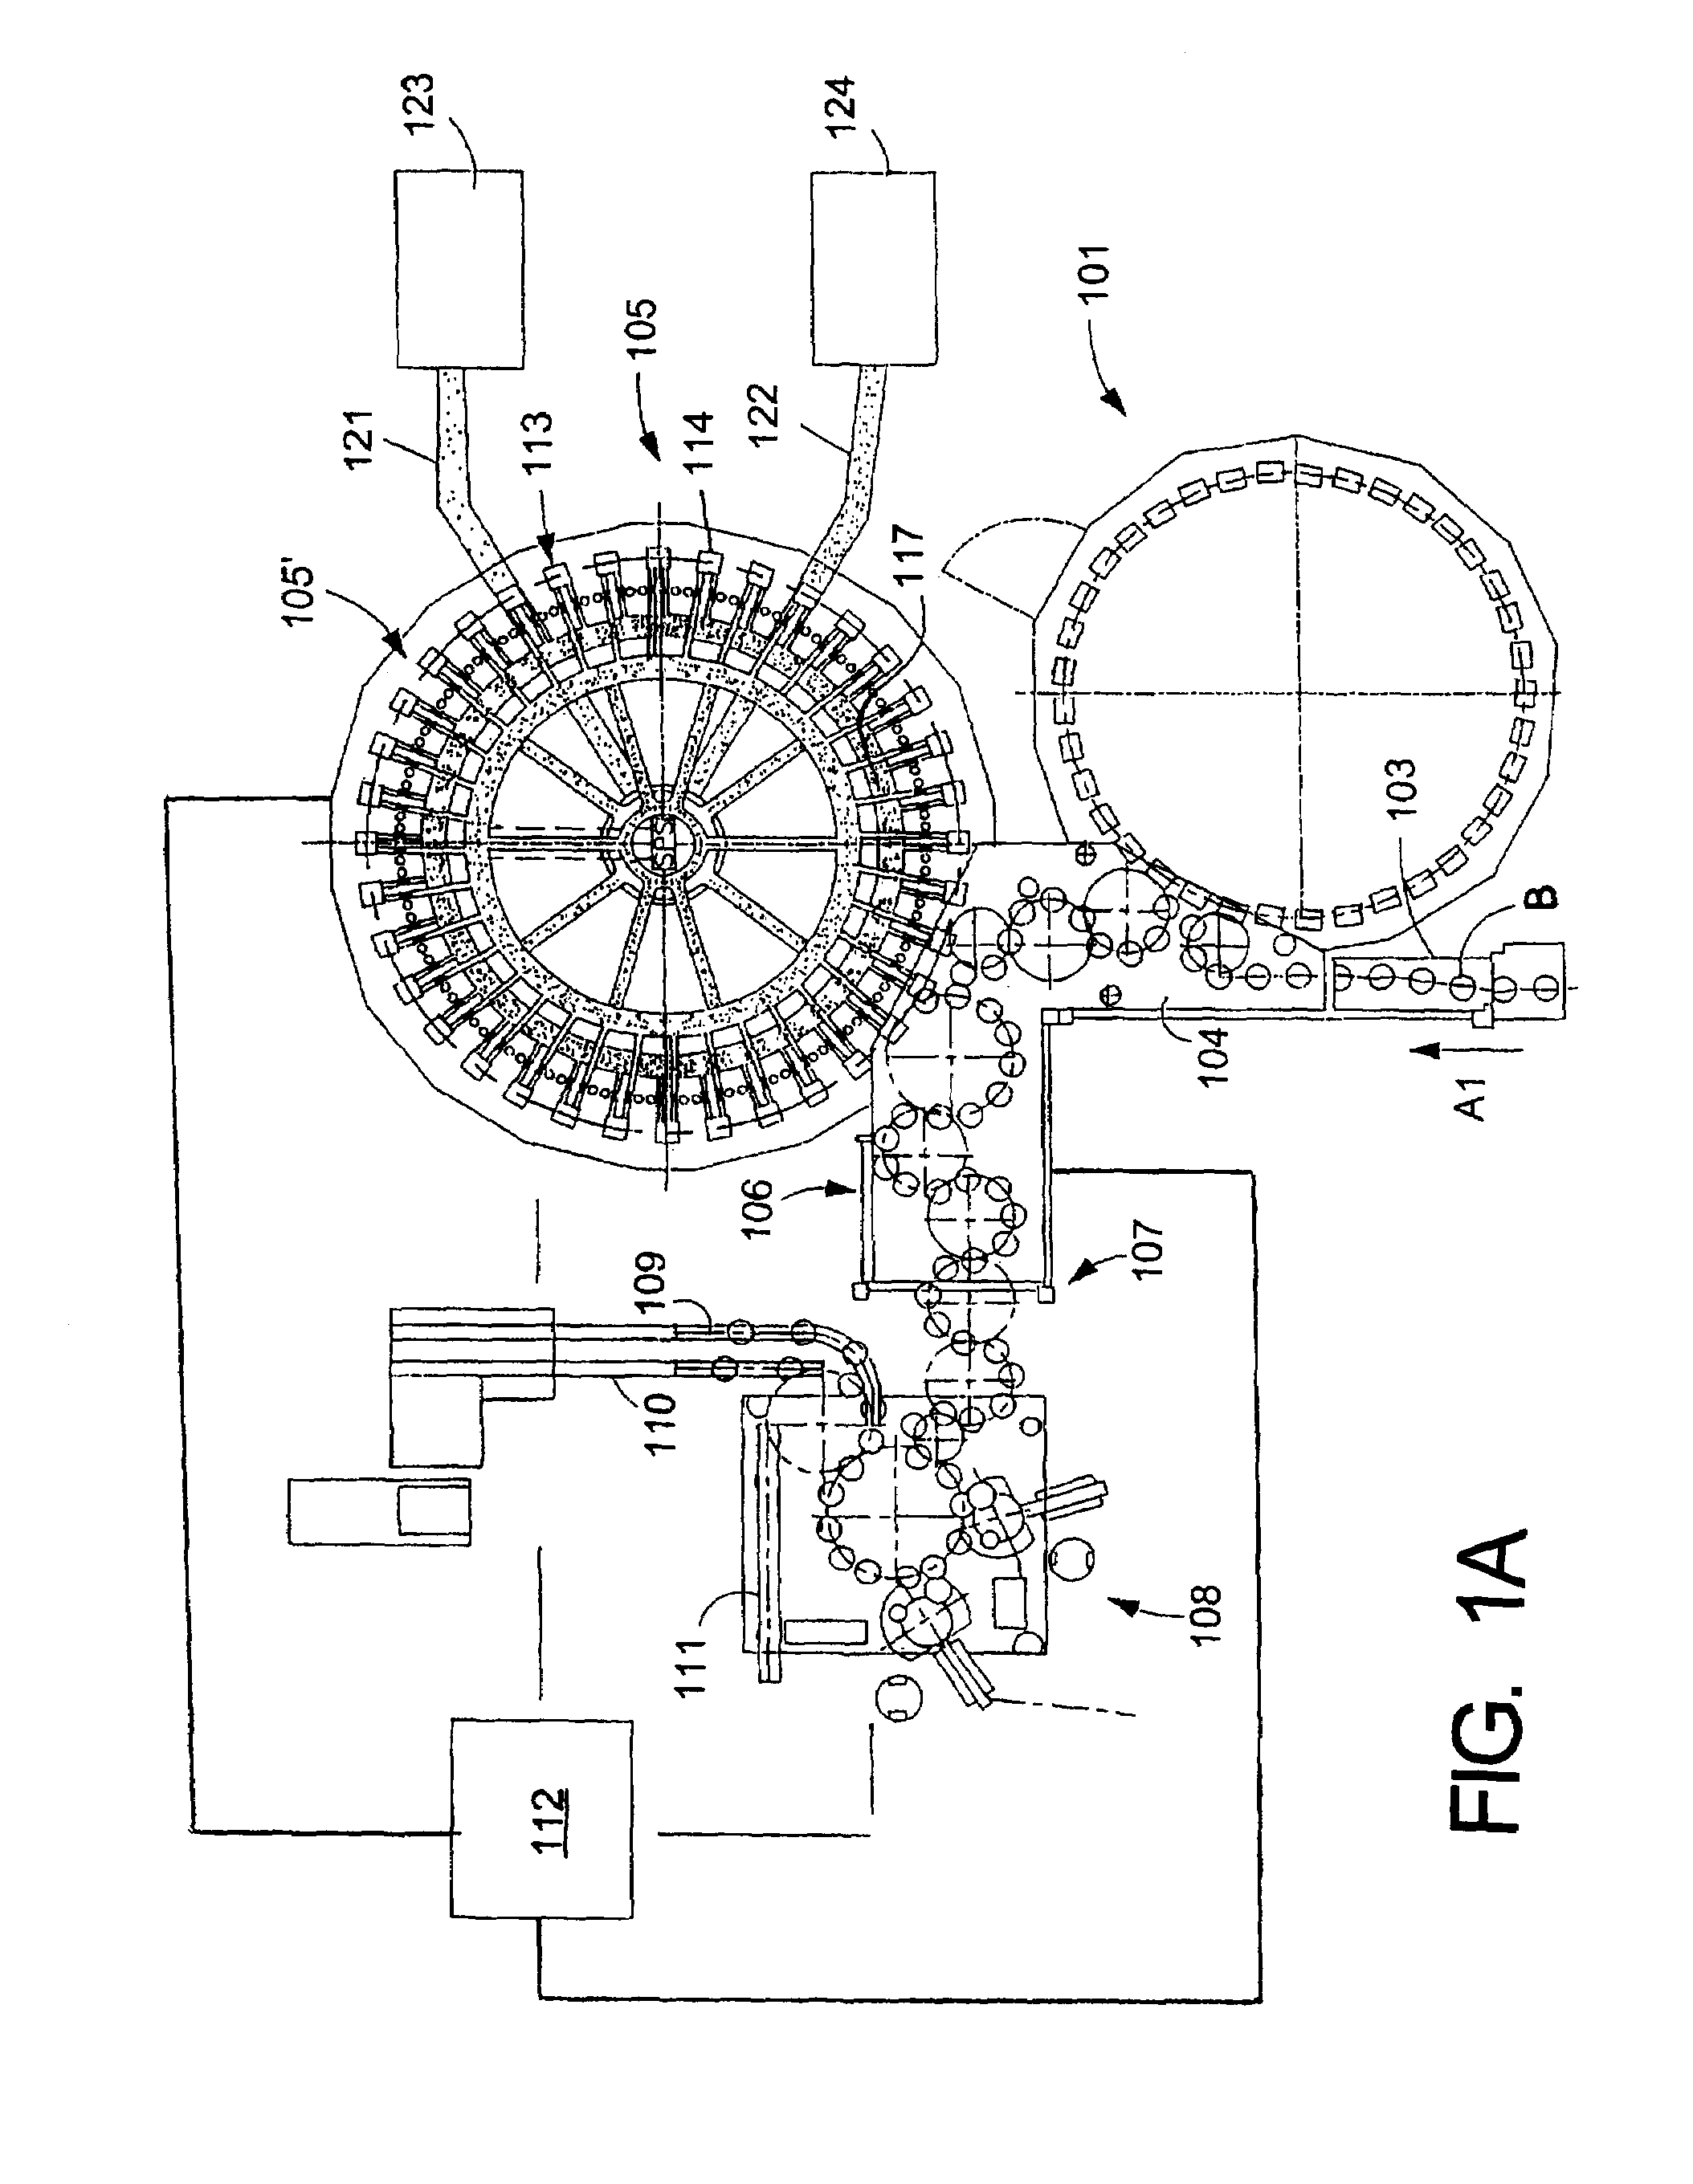 Container filling element for open-filling of containers